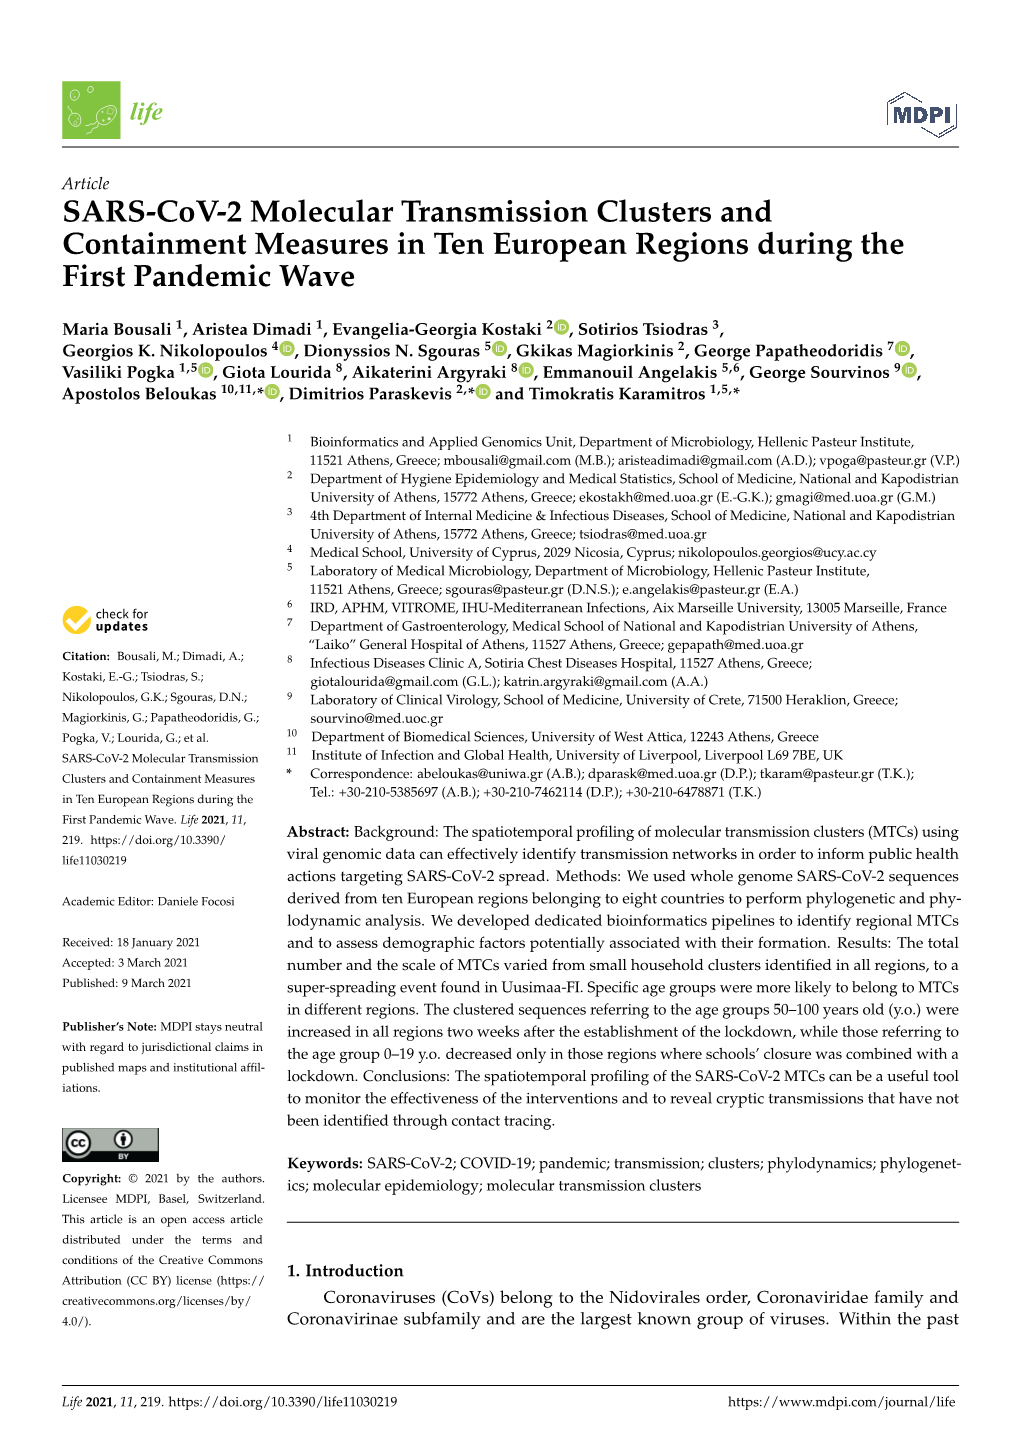 SARS-Cov-2 Molecular Transmission Clusters and Containment Measures in Ten European Regions During the First Pandemic Wave